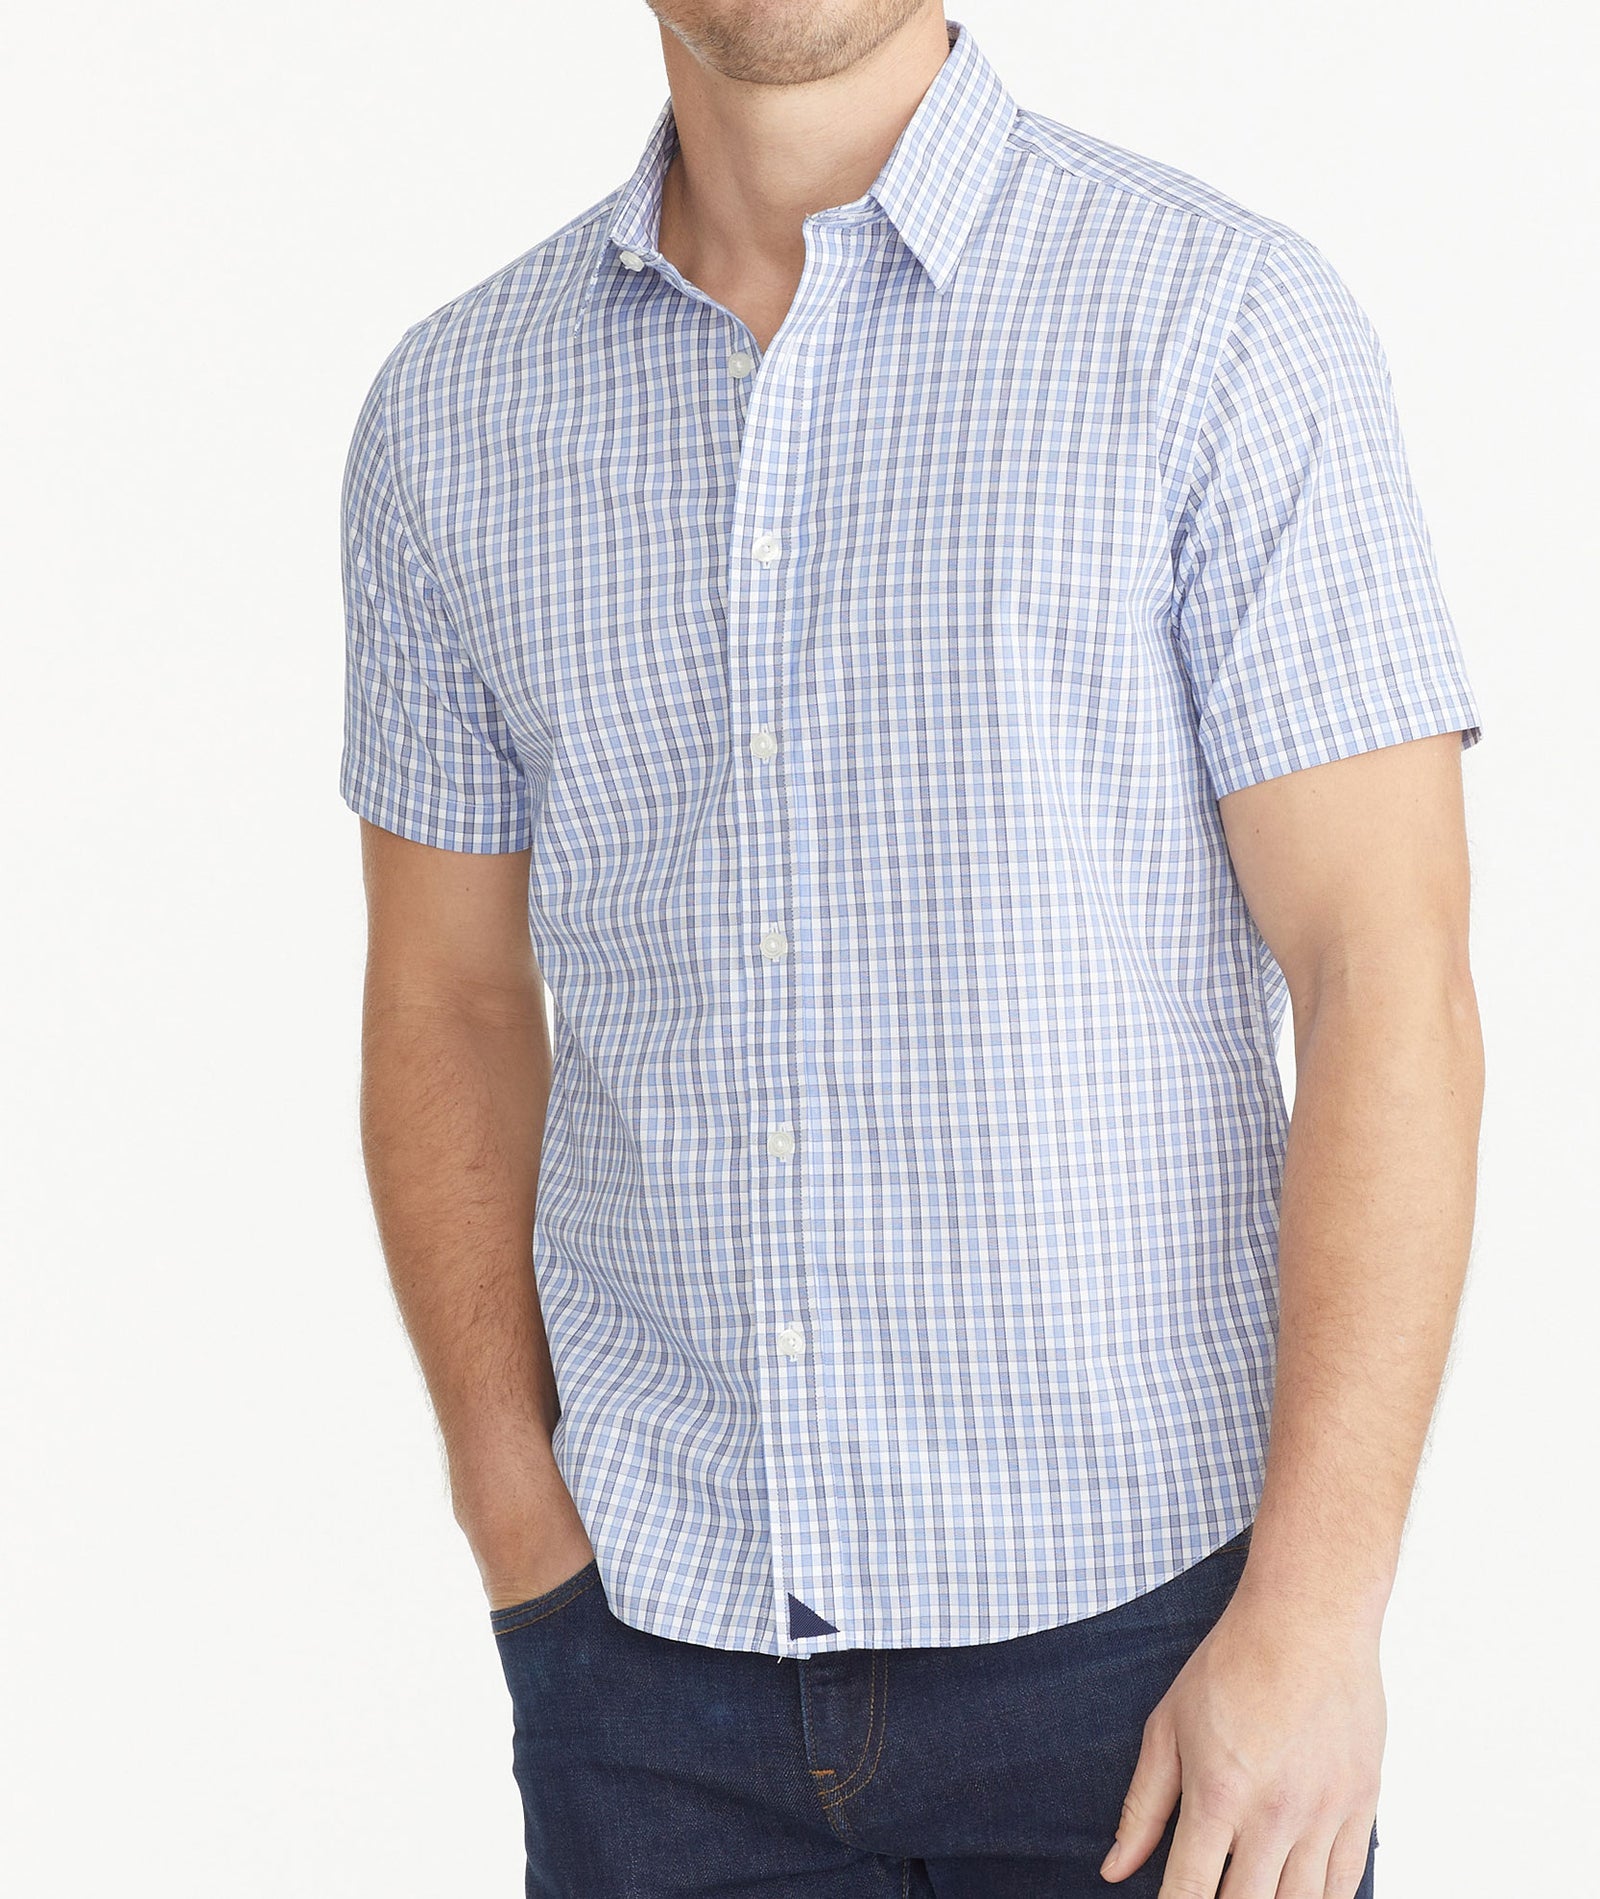 Wrinkle-Free Short-Sleeve Dante Shirt Blue with Gray & White Check ...